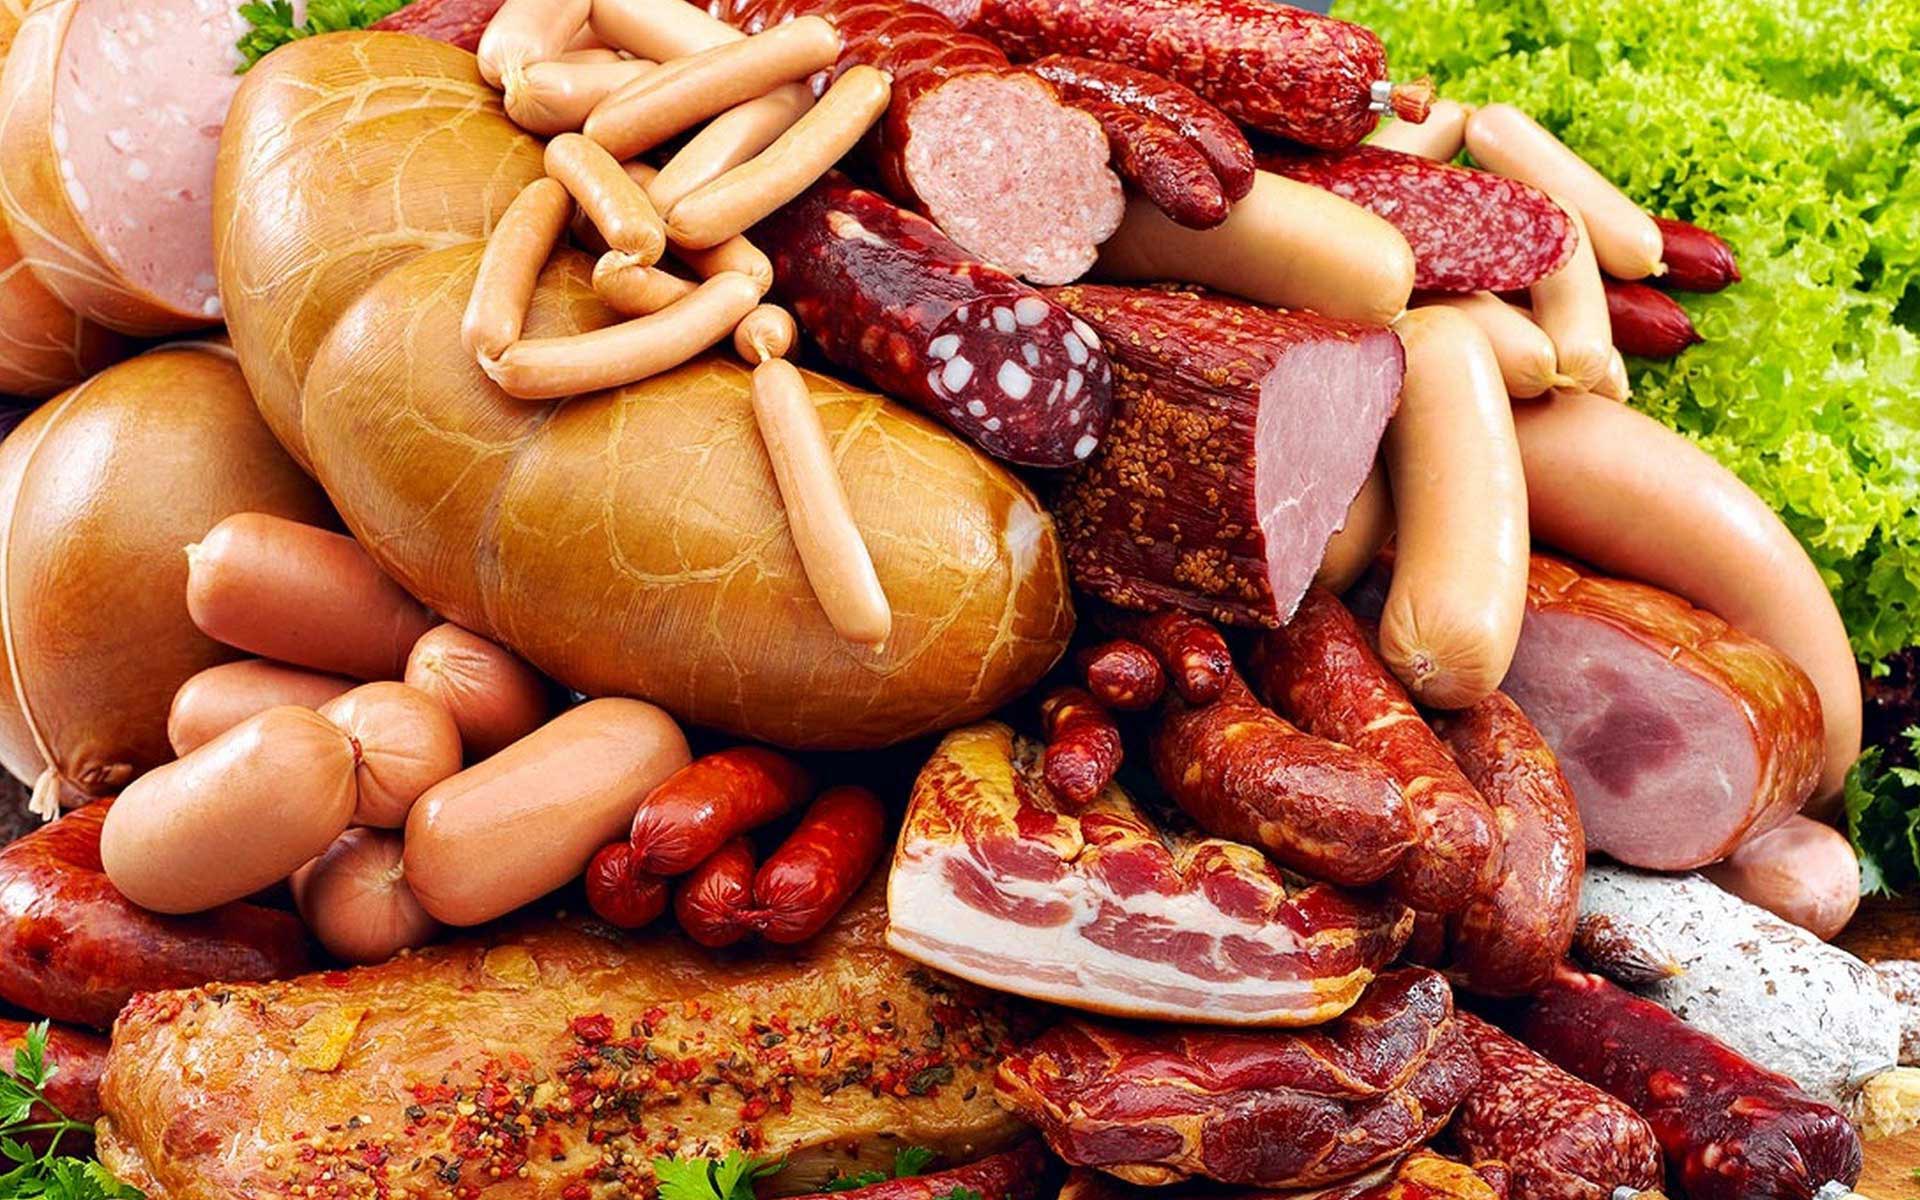 Food Smoked Wallpapers For Desktop Backgrounds Free HD Wallpapers